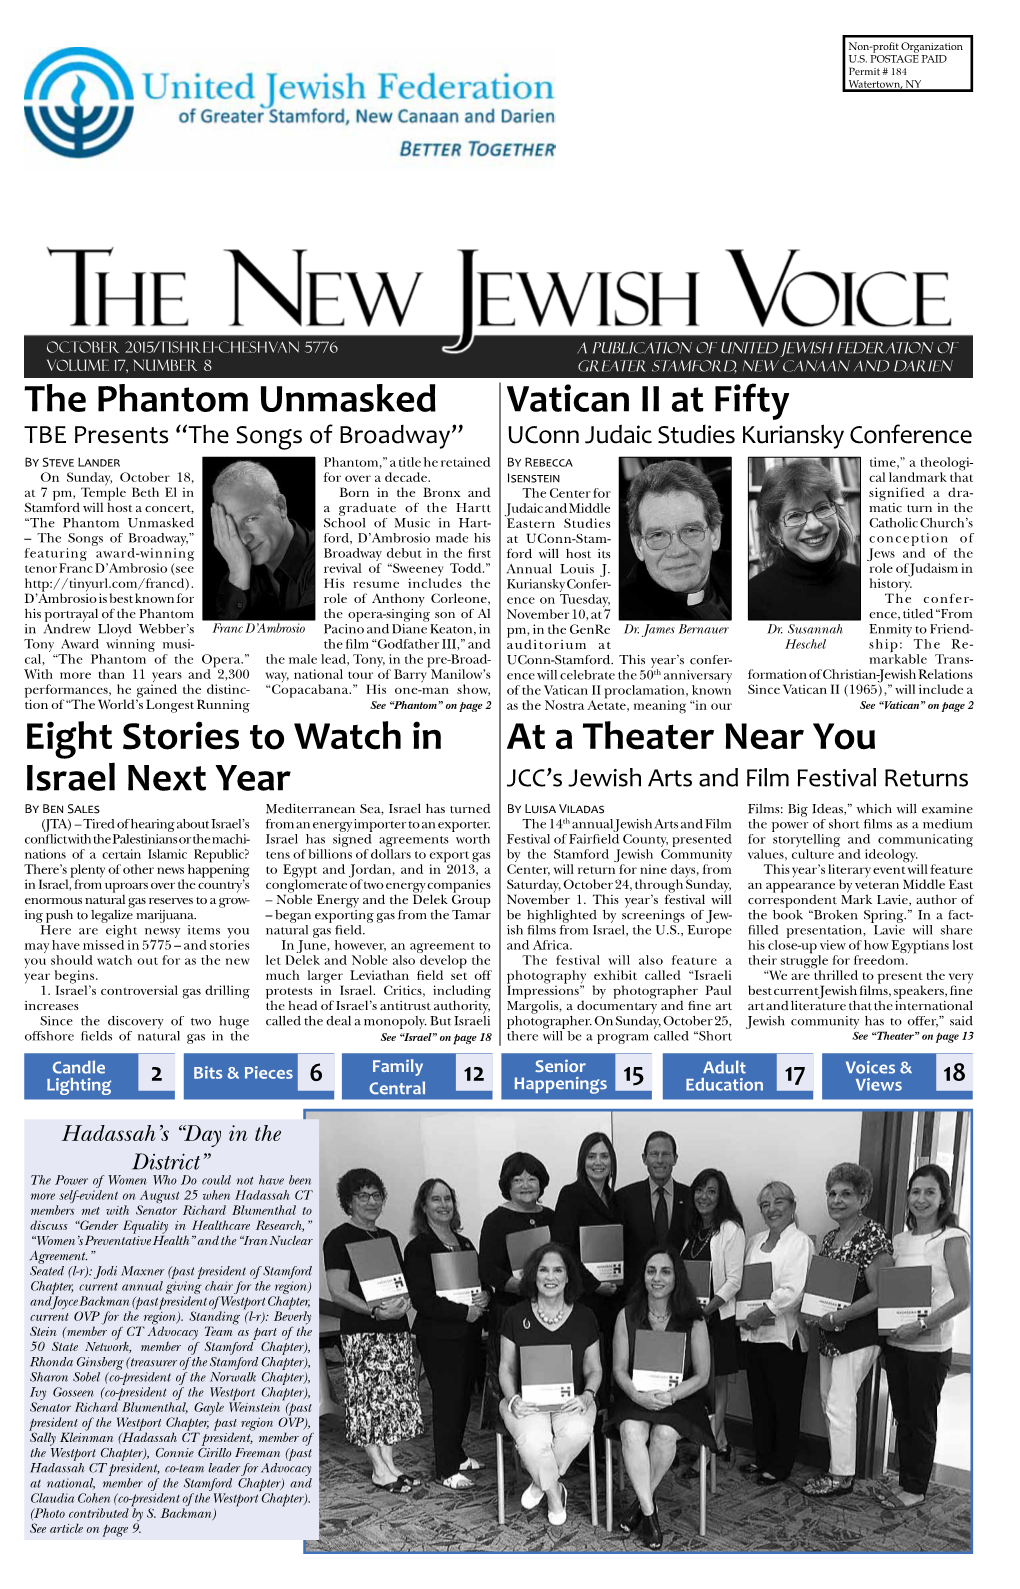 THE NEW JEWISH VOICE October 2015